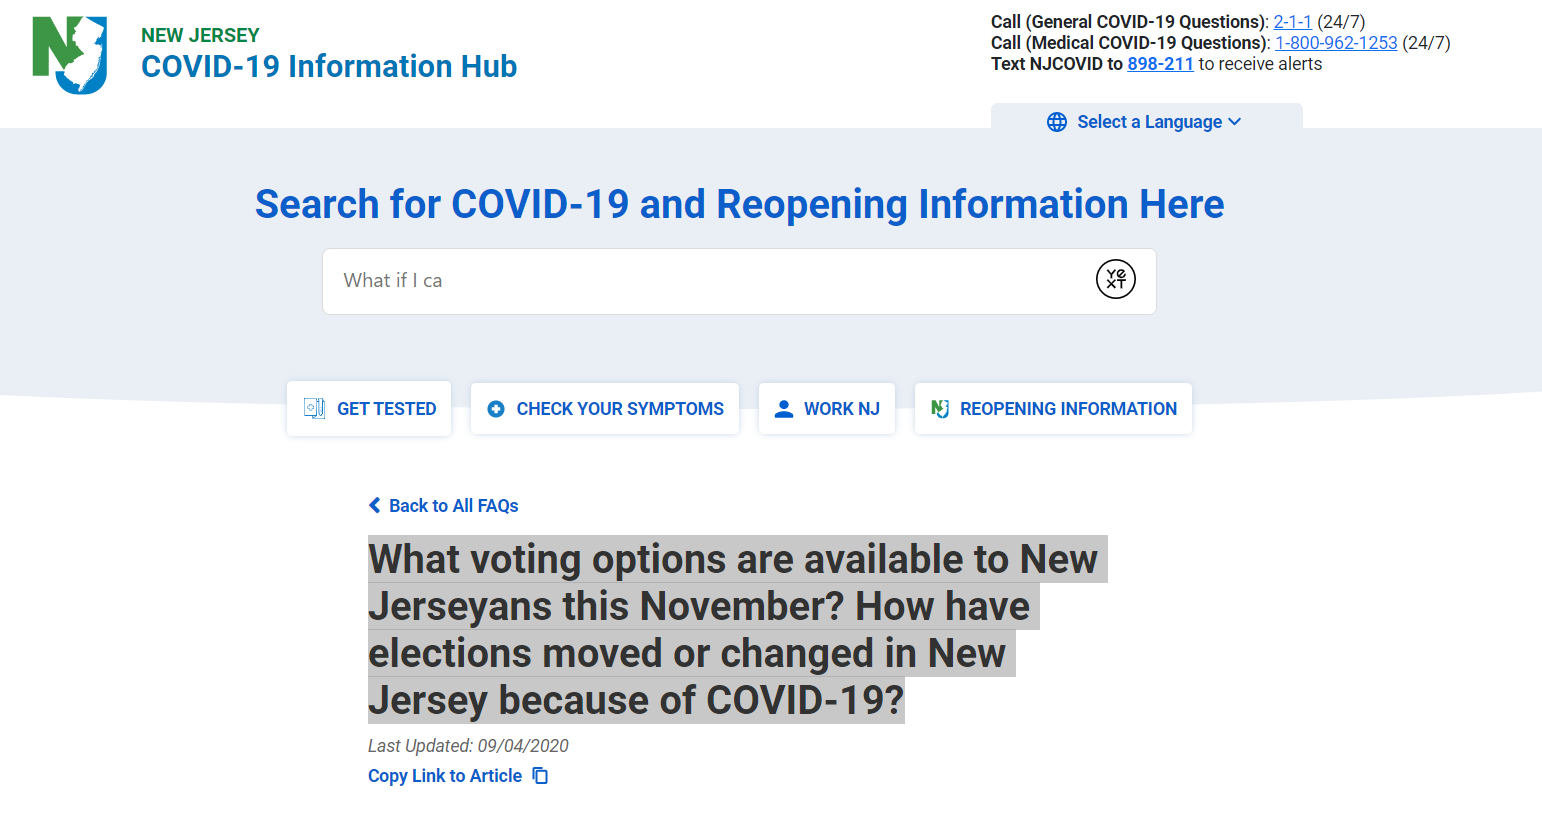 Have elections moved or changed in New Jersey because of COVID-19?